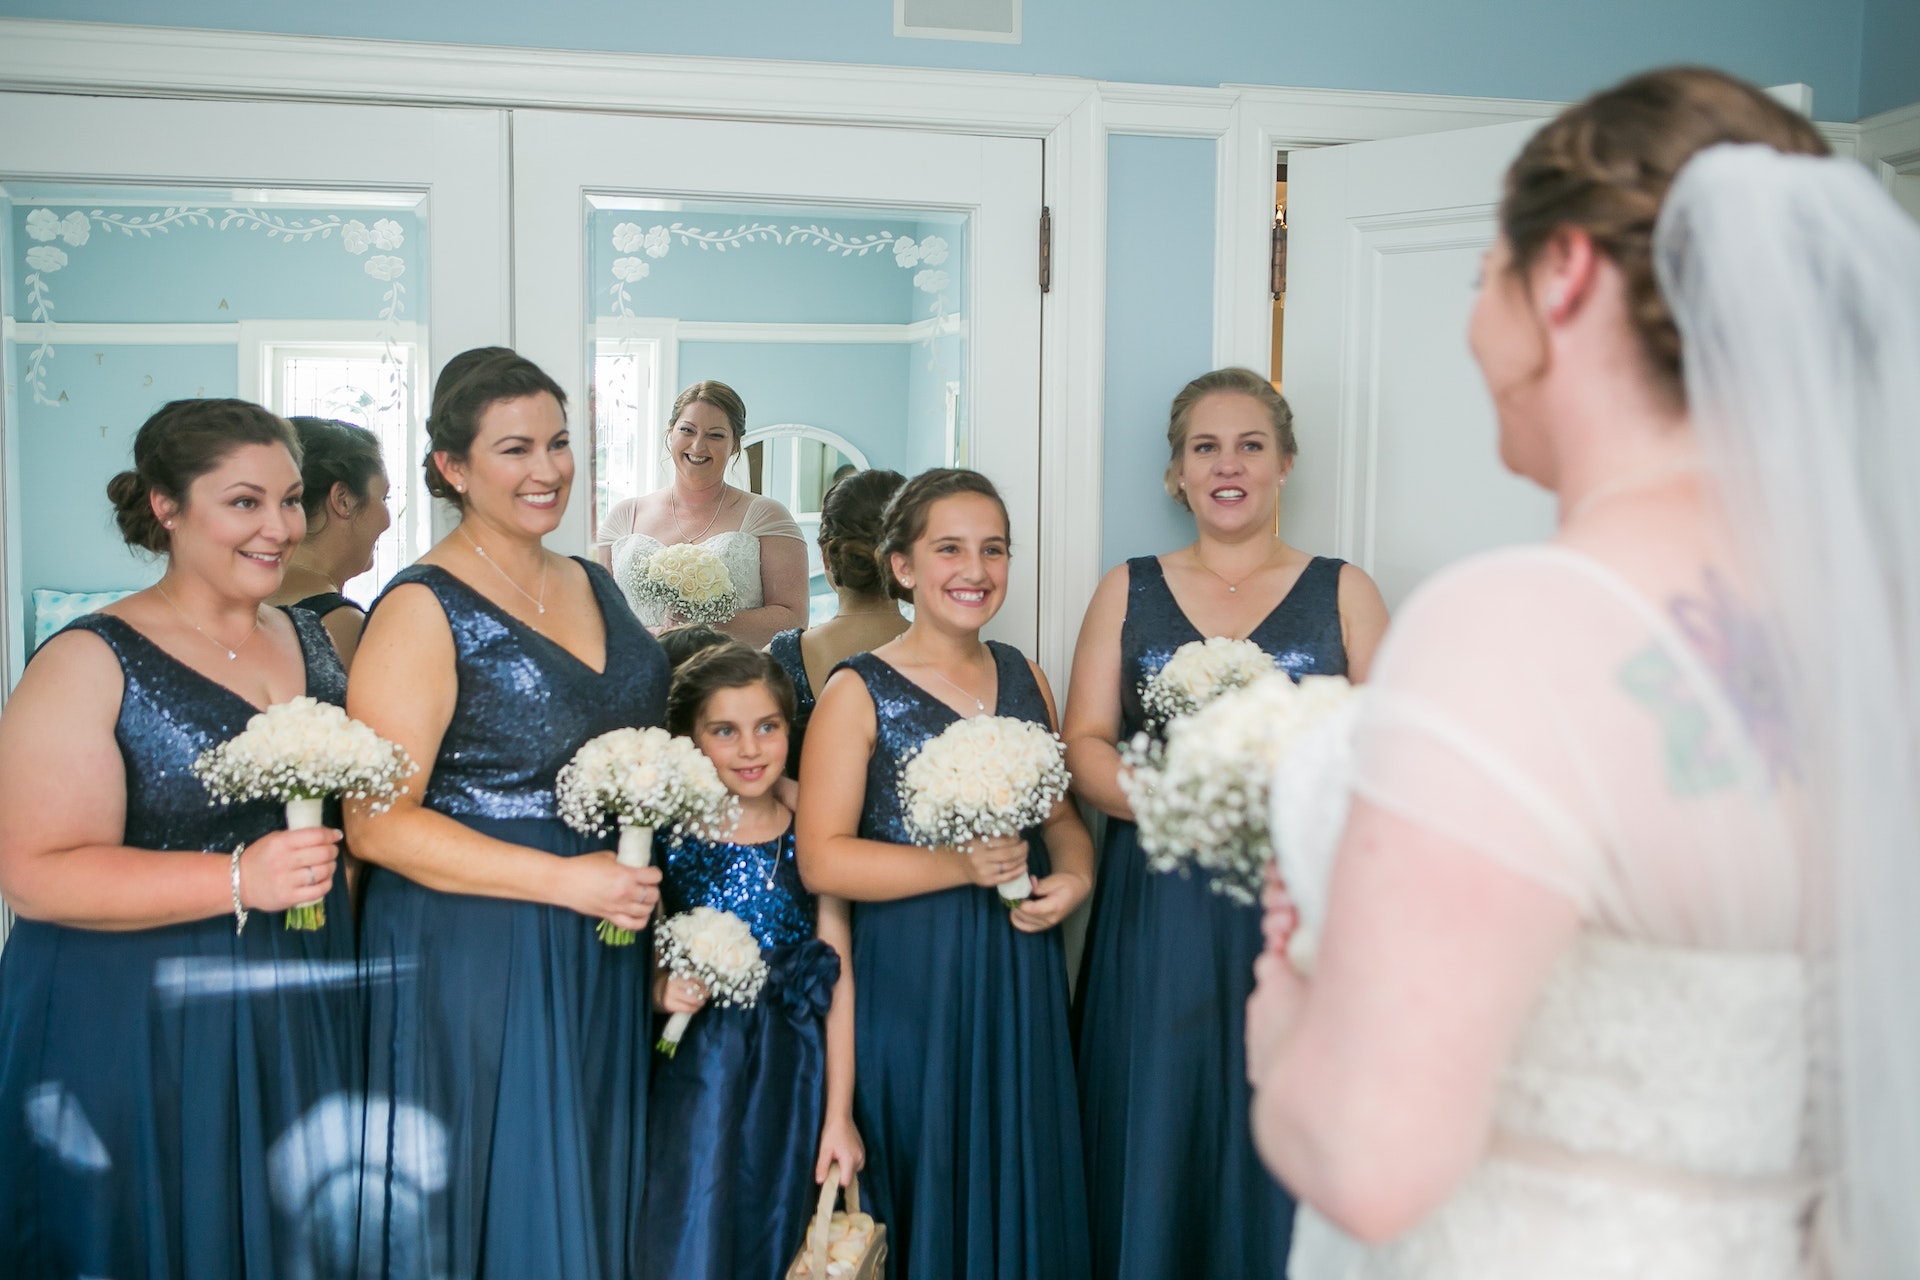 A young bridesmaid standing with other bridesmaids in front of the bride | Source: Pexels